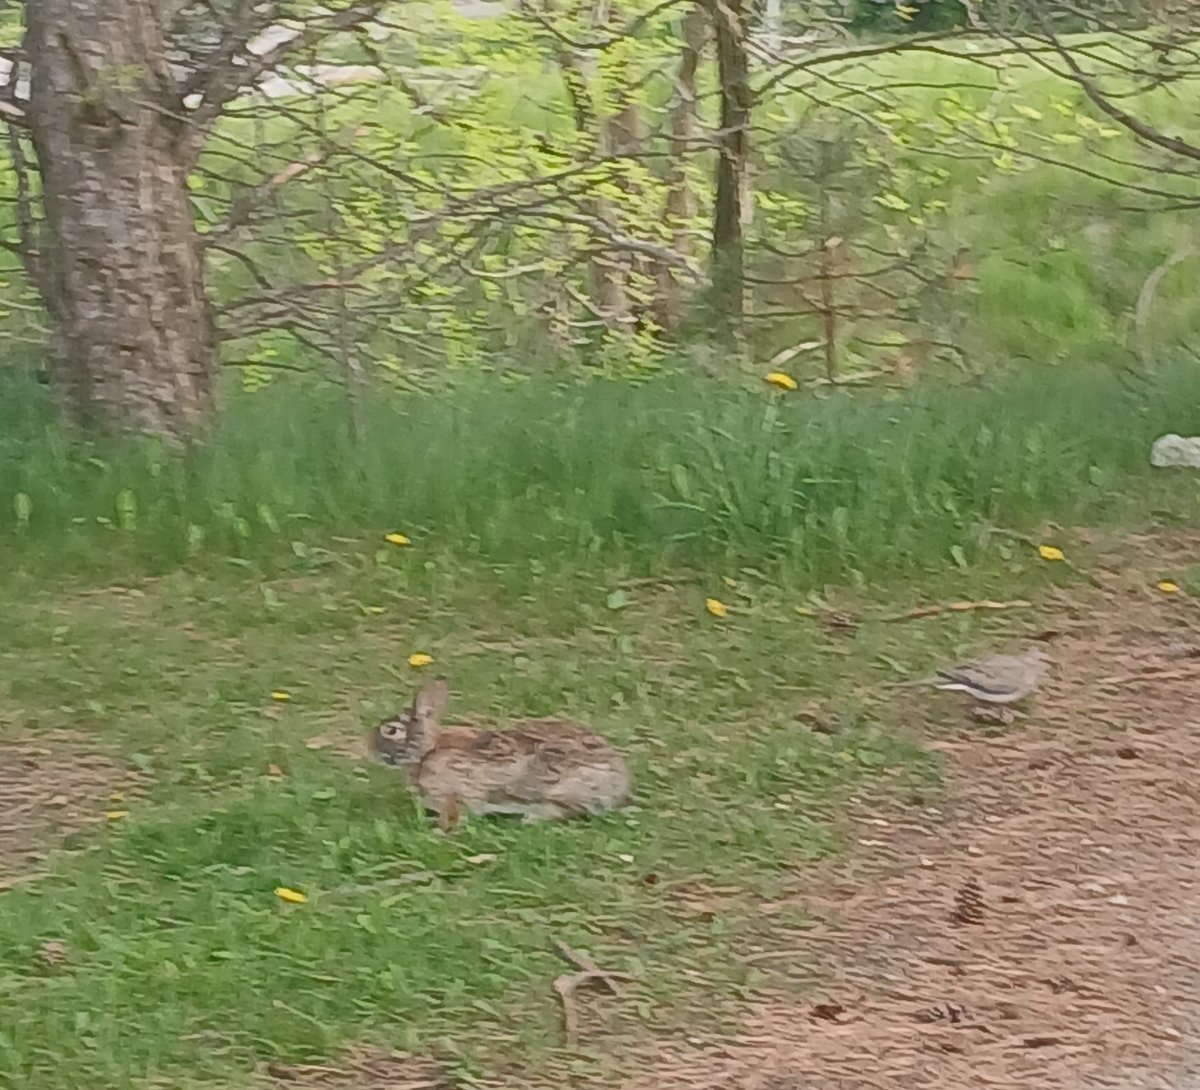 fuzzy pic of a rabbit and a bird right after I had to move a turtle across the road